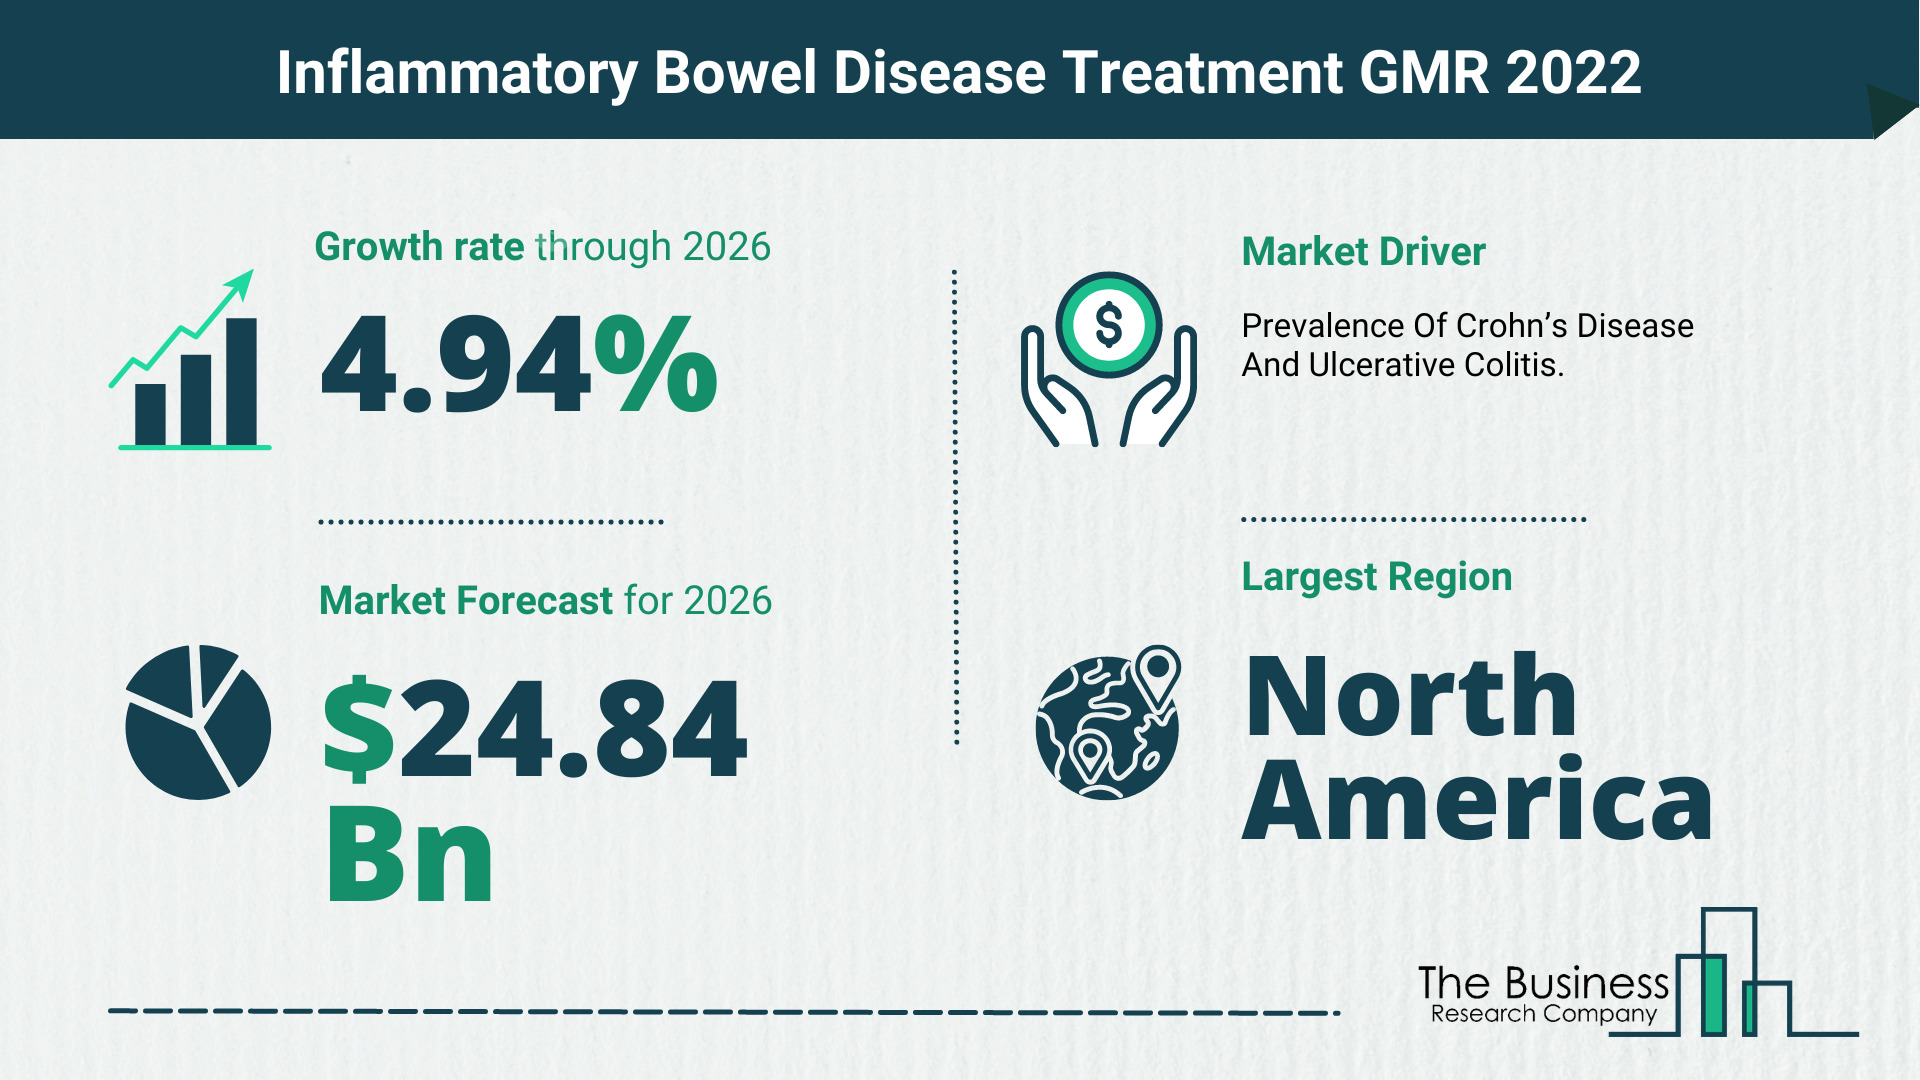 The Inflammatory Bowel Disease Treatment Market Share, Market Size, And Growth Rate 2022